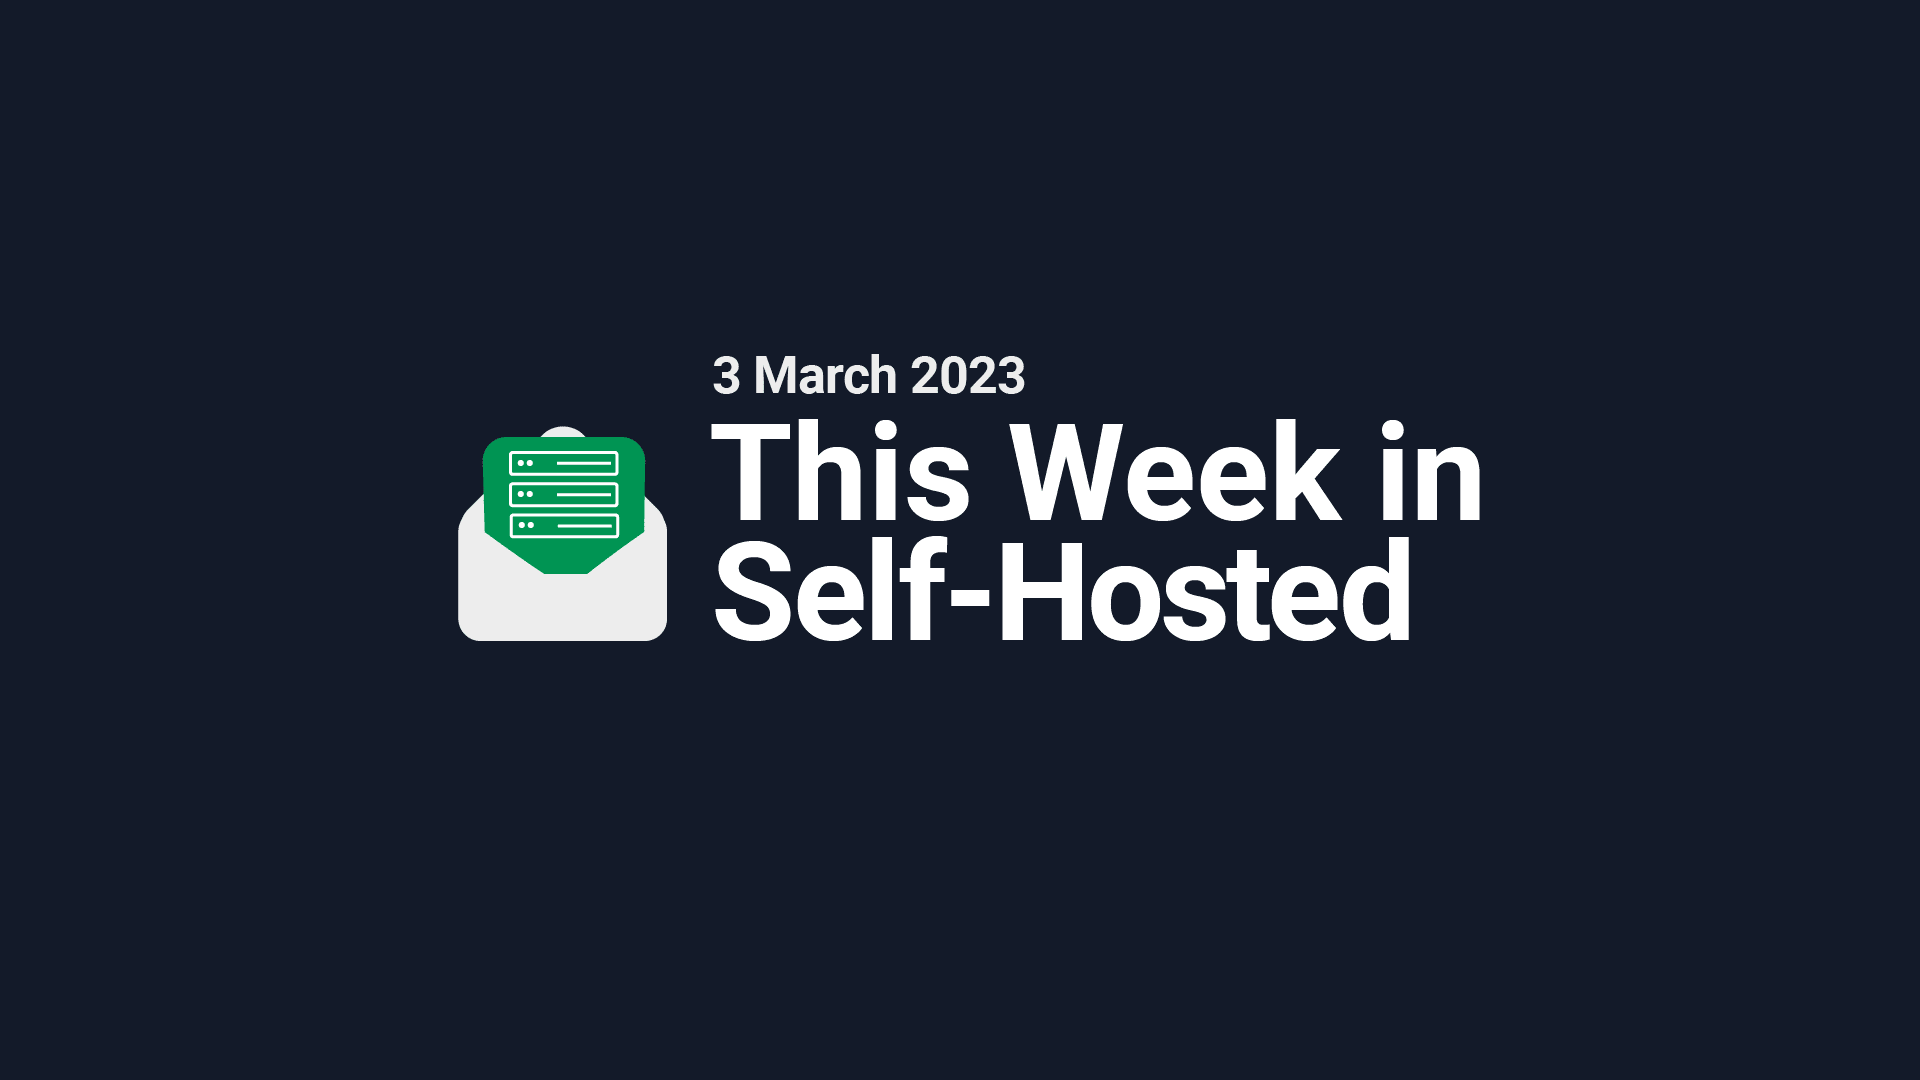 This Week in Self-Hosted (3 March 2023) Post image